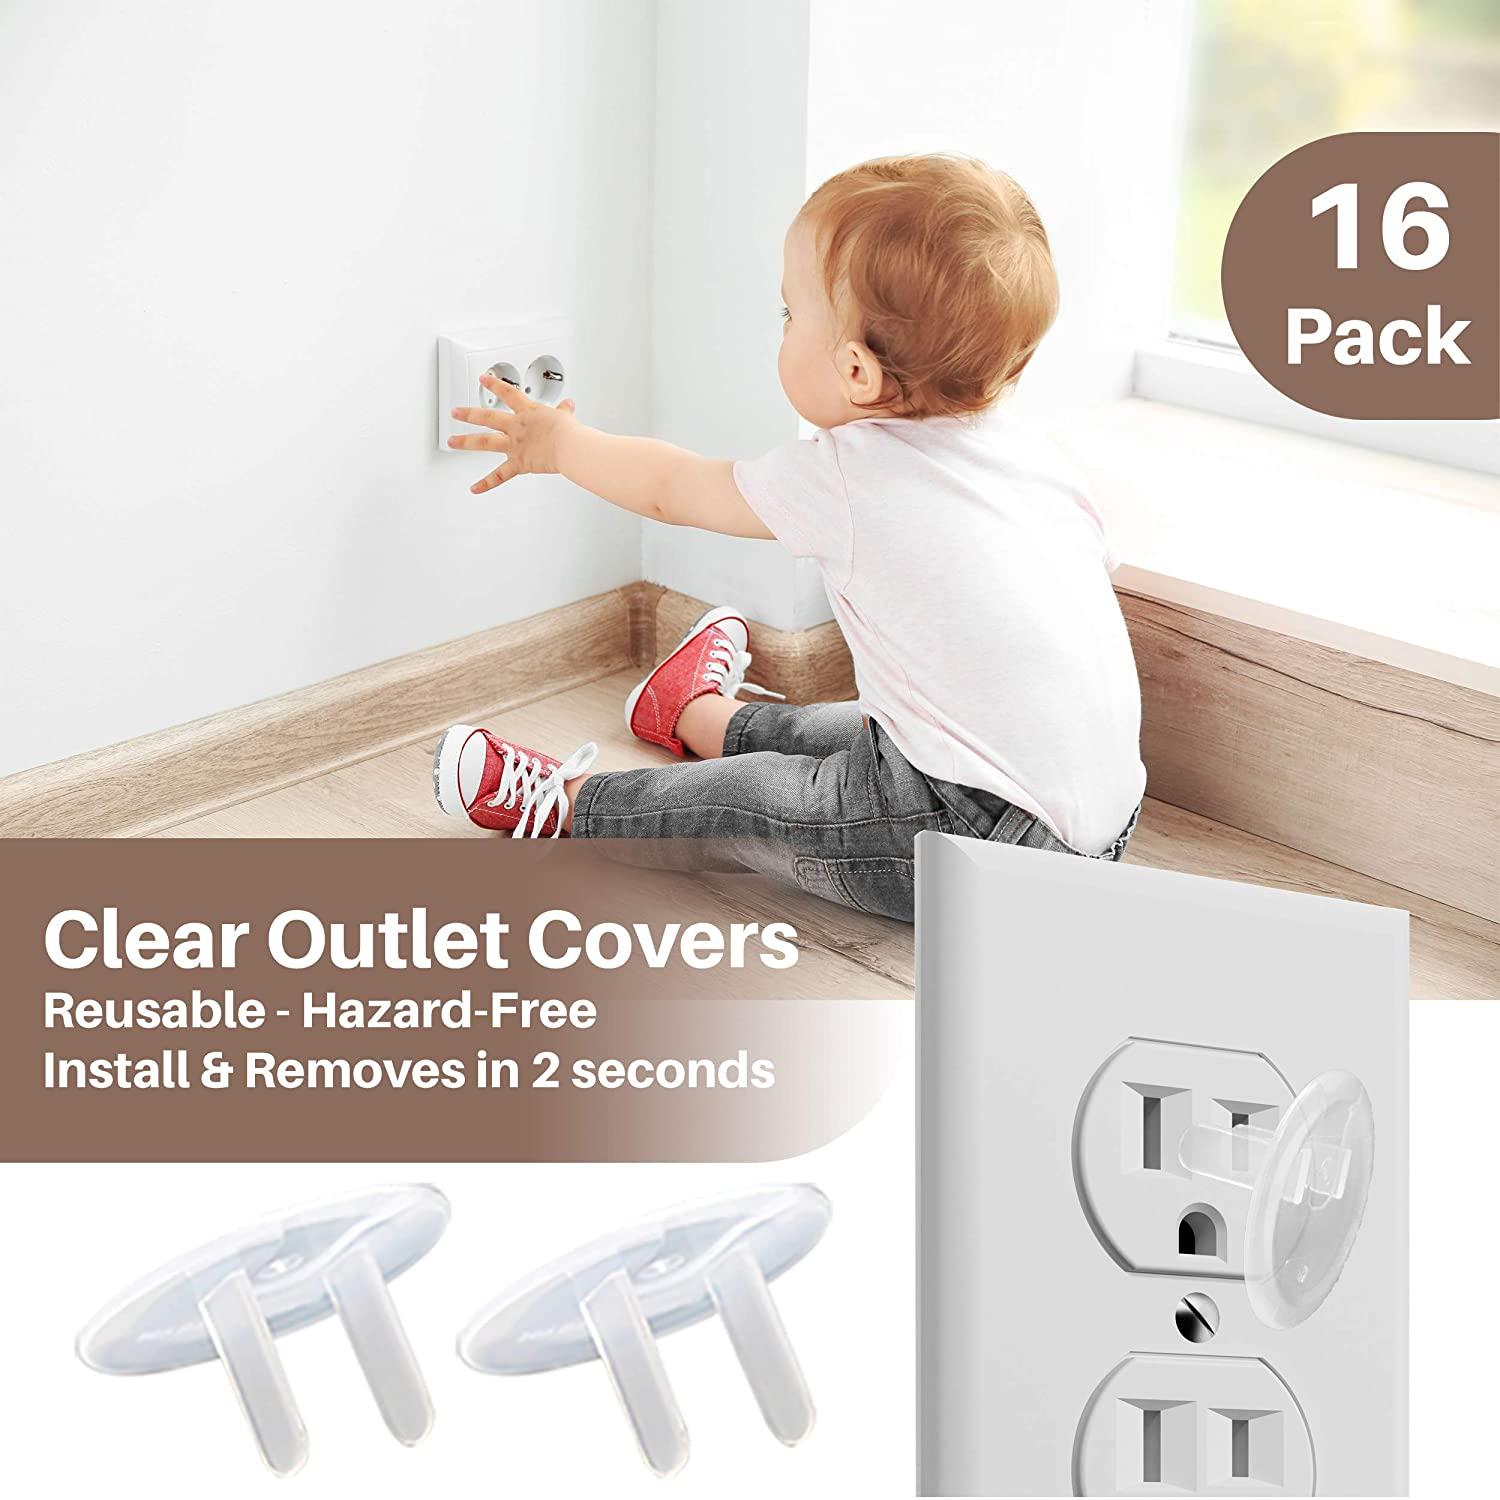 Complete Baby Proofing Kit - Child Safety Hidden Locks for Cabinets &  Drawers, Adjustable Safety Latches, Corner Guards and Outlet Covers - Baby  Proof Pack to Keep Your Child Safe at Home